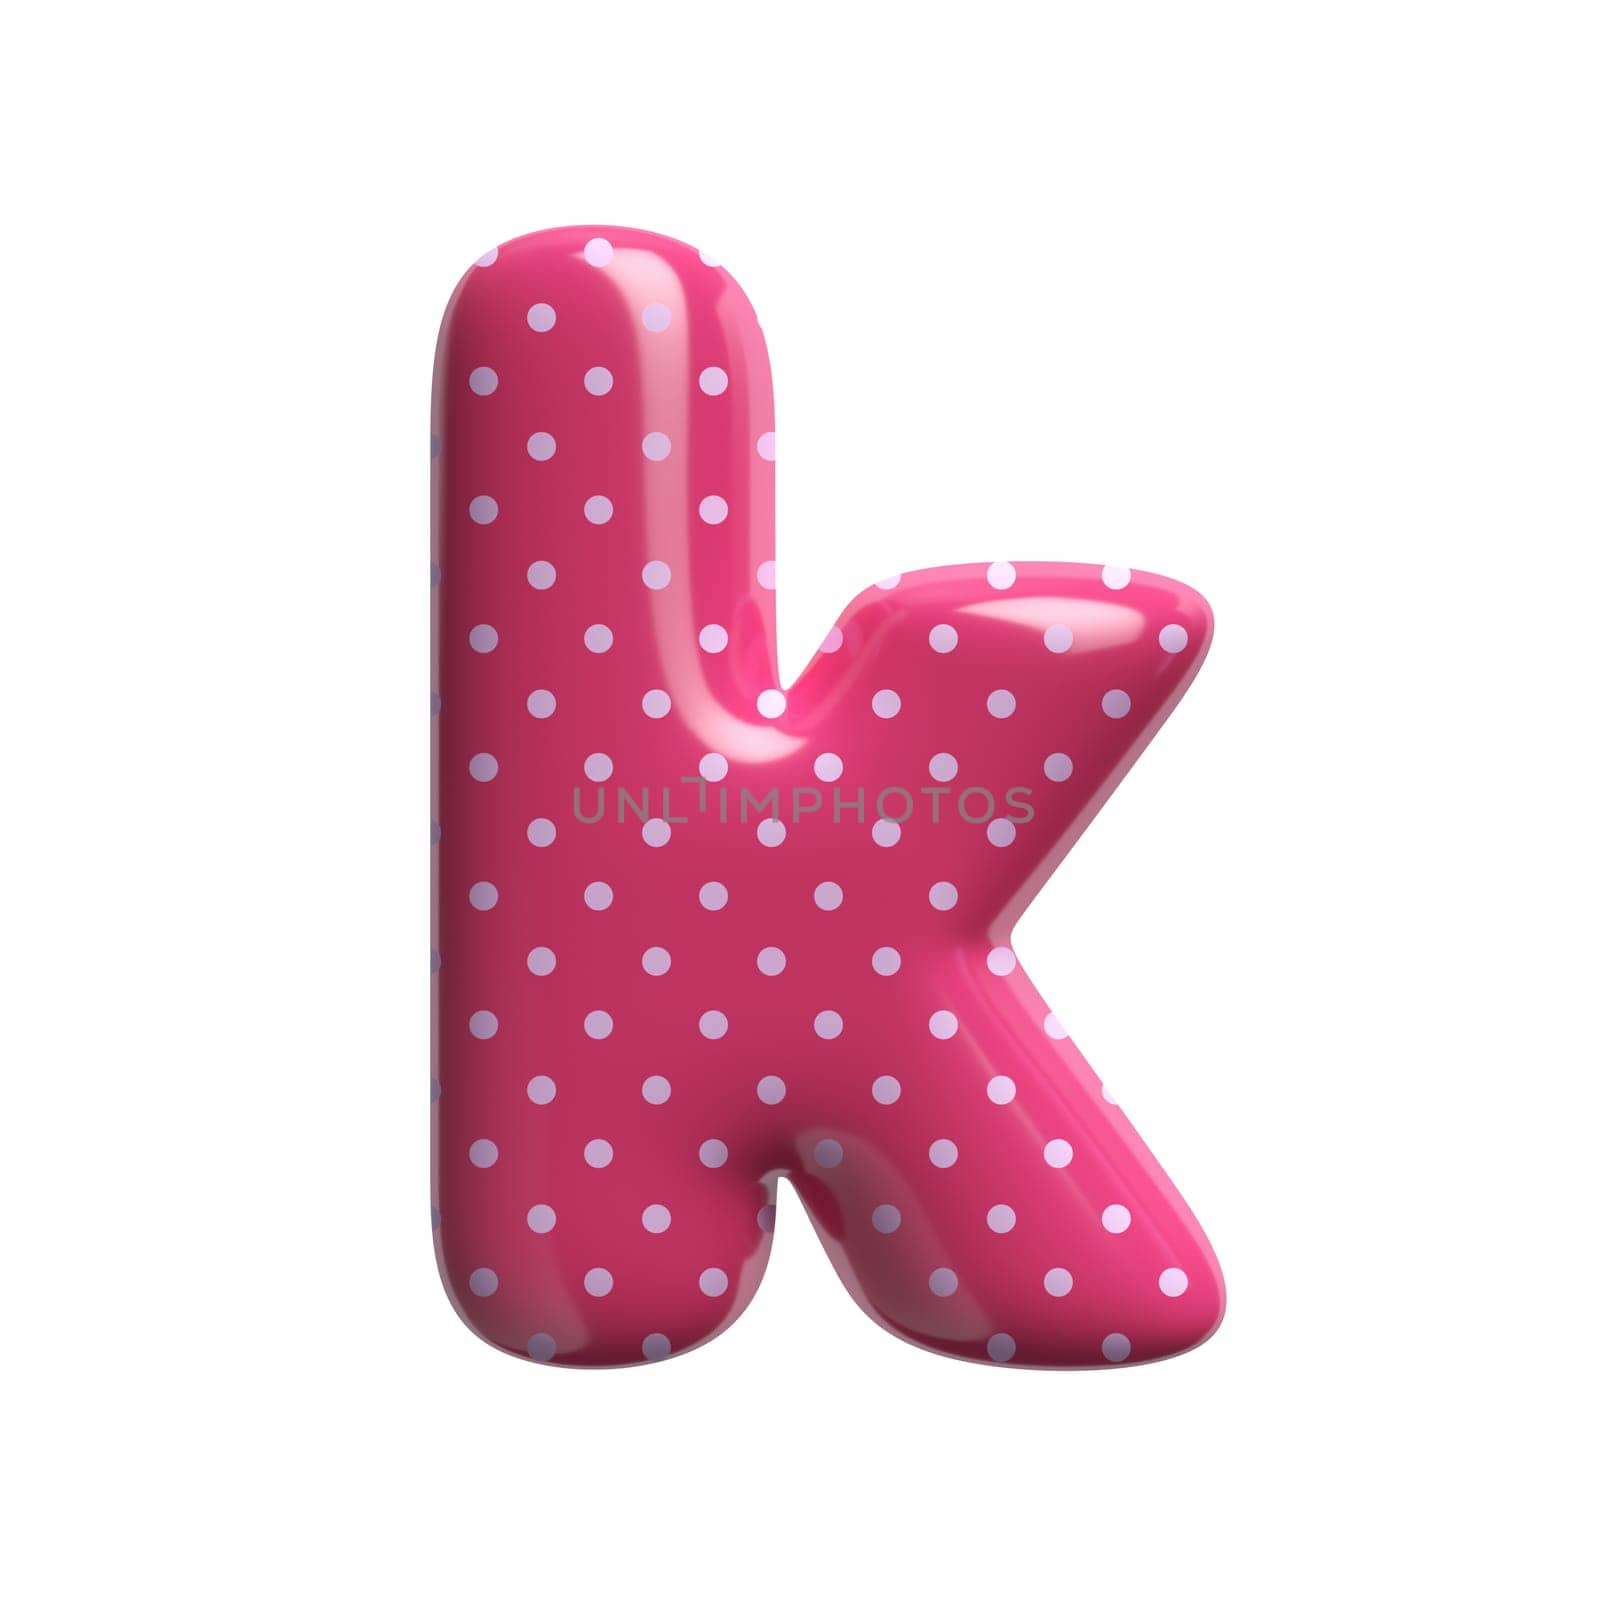 Polka dot letter K - Small 3d pink retro font - Suitable for Fashion, retro design or decoration related subjects by chrisroll